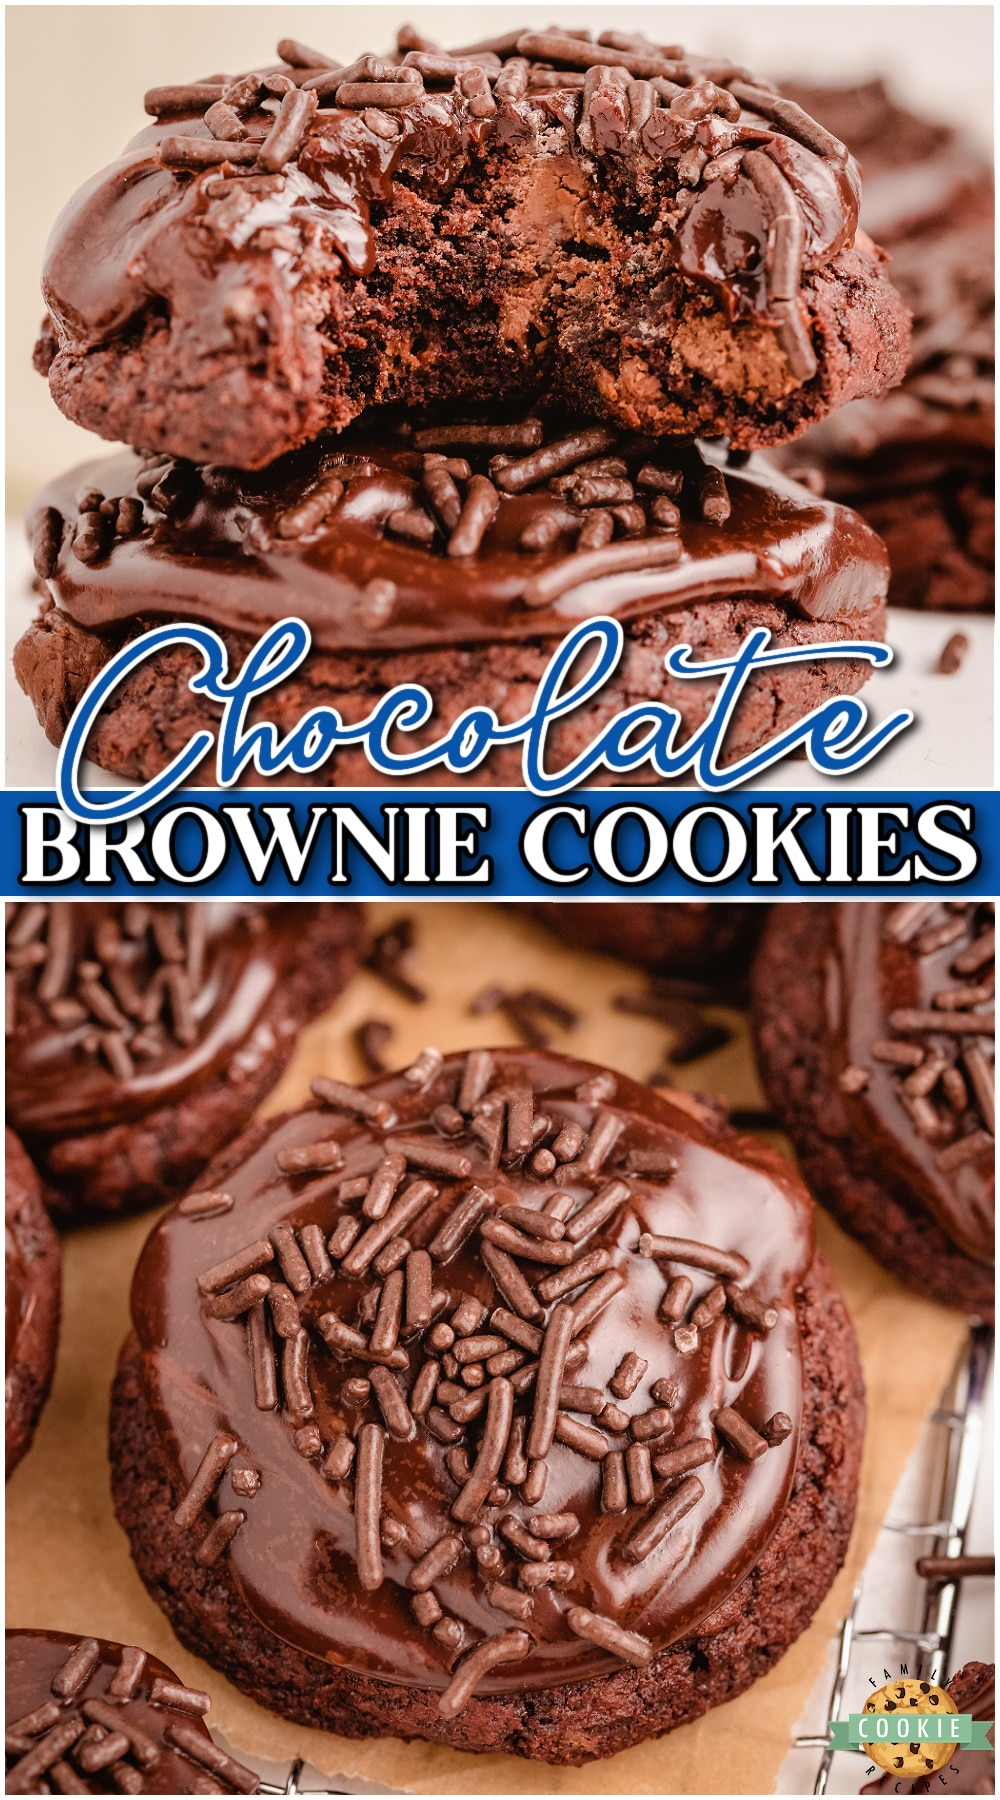 Chewy chocolatey Frosted Brownie Cookies are everything you love about brownies, in cookie form! Soft & chewy with a decadent chocolate icing, these cookies are perfect for chocolate lovers!  via @buttergirls